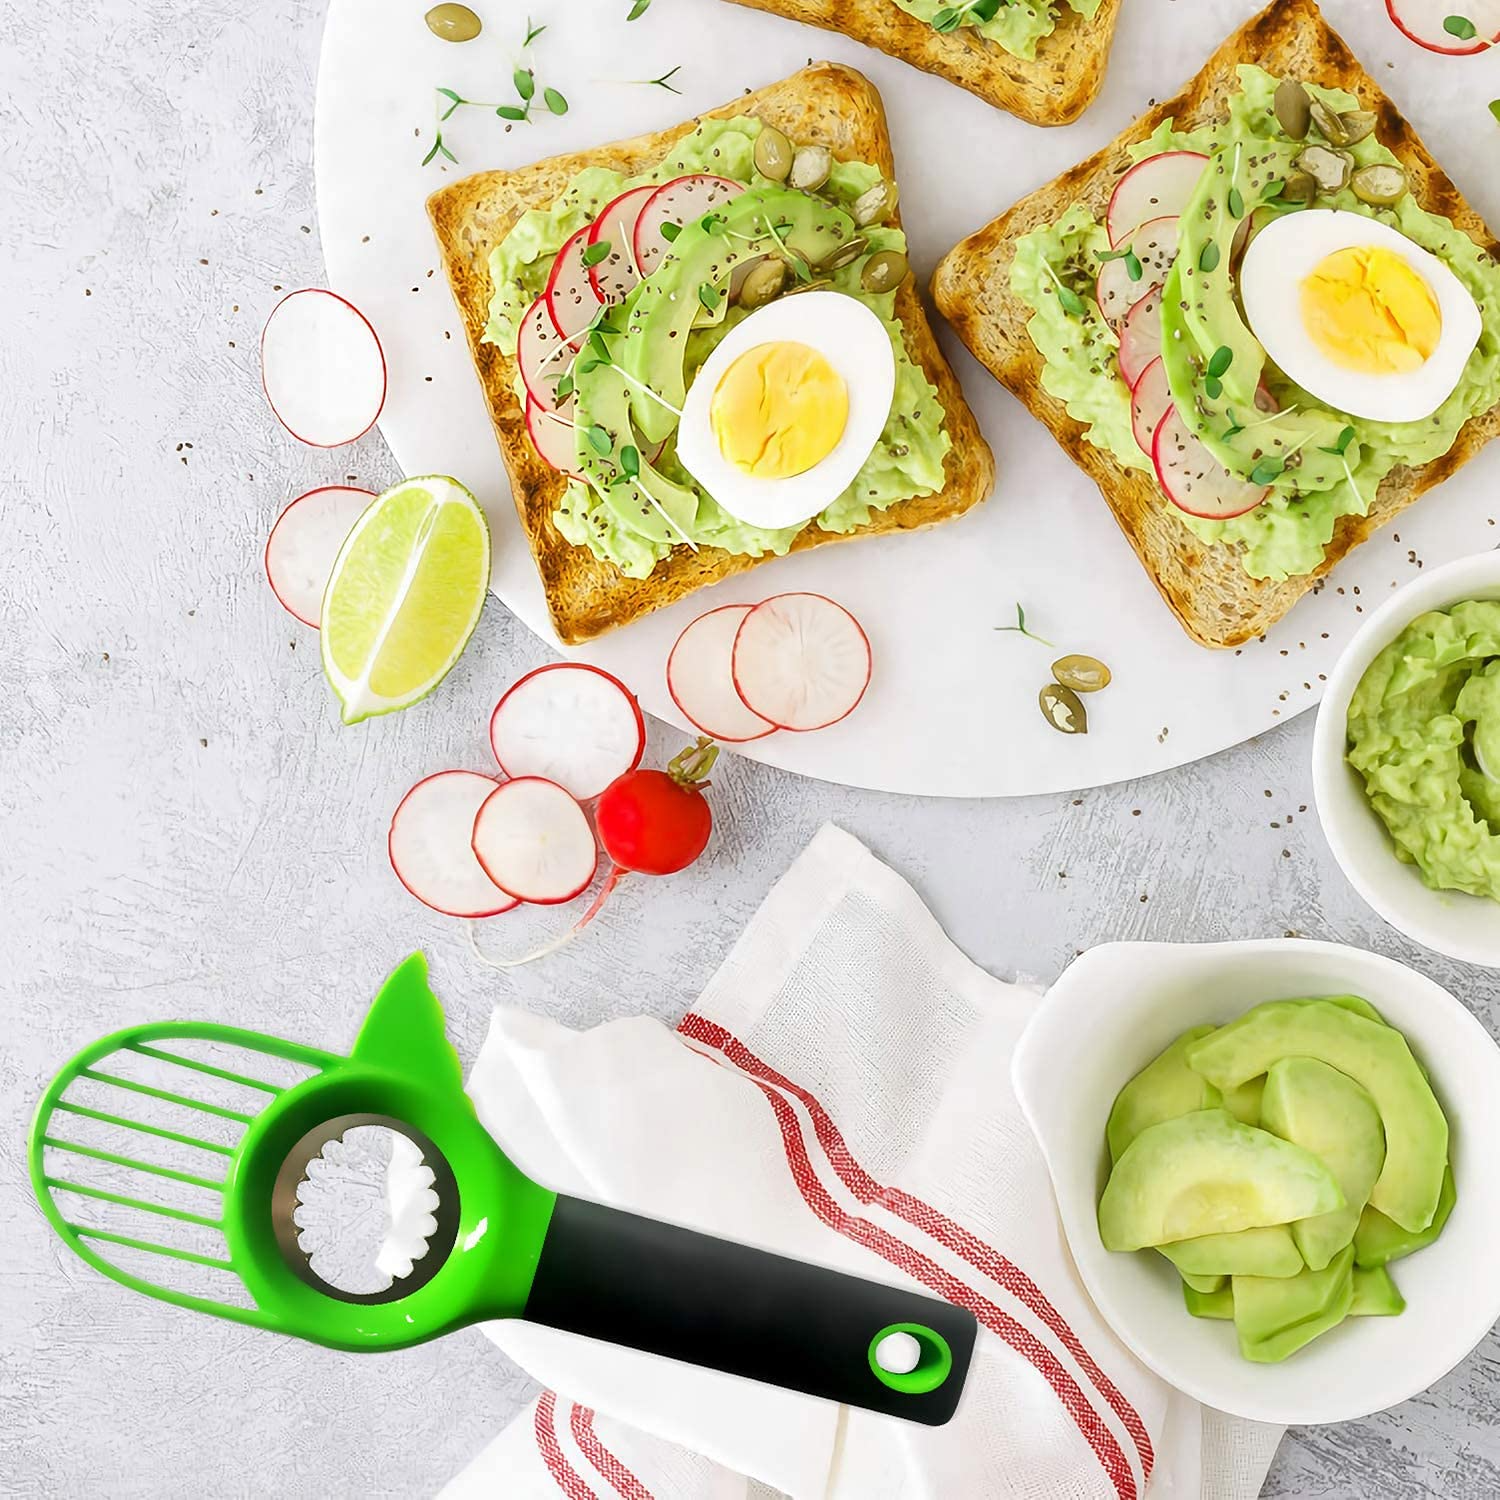 This 3-in-1 Avocado Slicer Helps You Make a Mean Guac